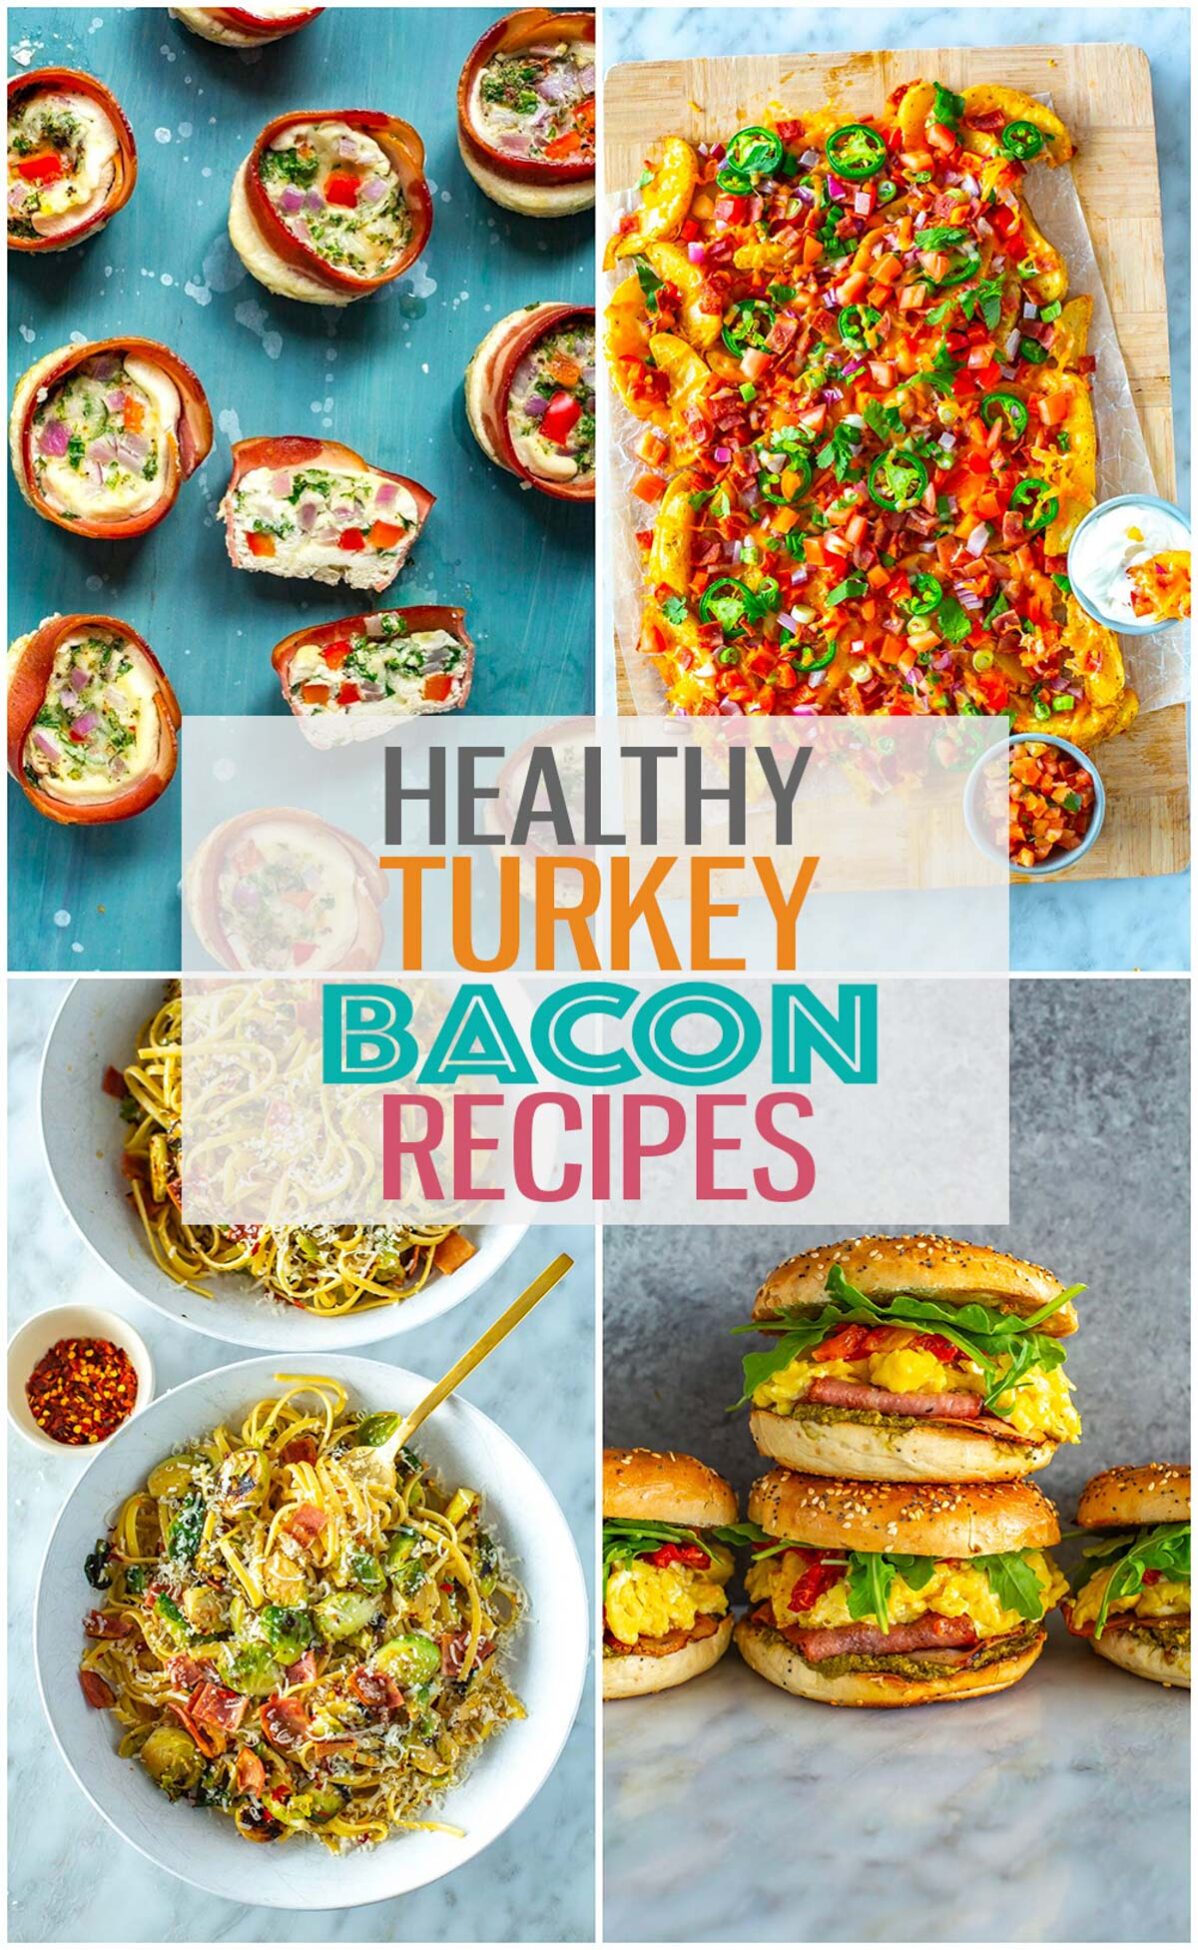 A collage of 4 different turkey bacon recipes with the text "Healthy Turkey Bacon Recipes" layered over top.